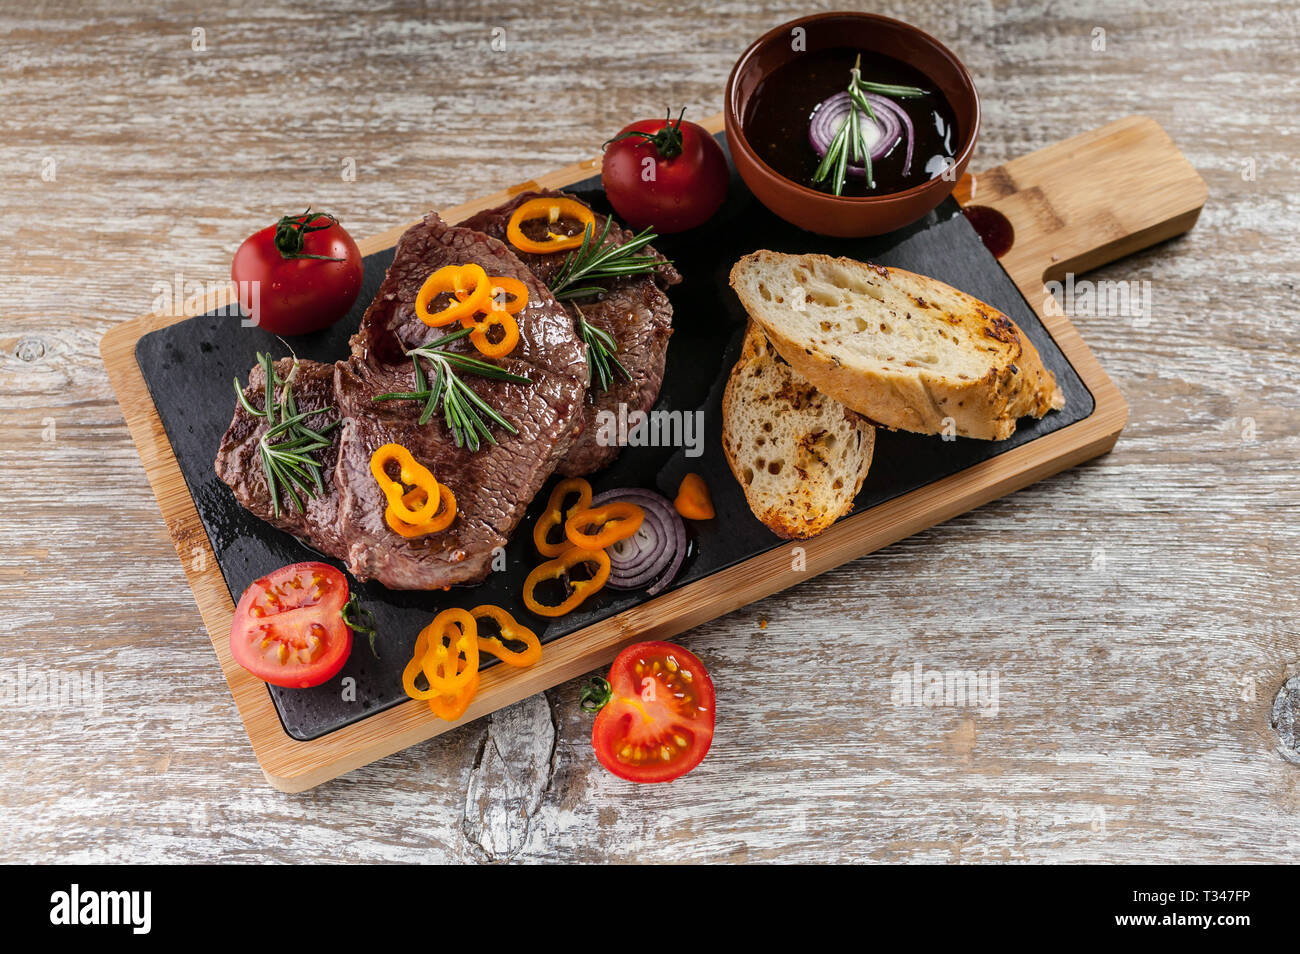 Fried Black Angus beef meat on a cutting board. Meat, spices, vegetables, croutons and rosemary Stock Photo